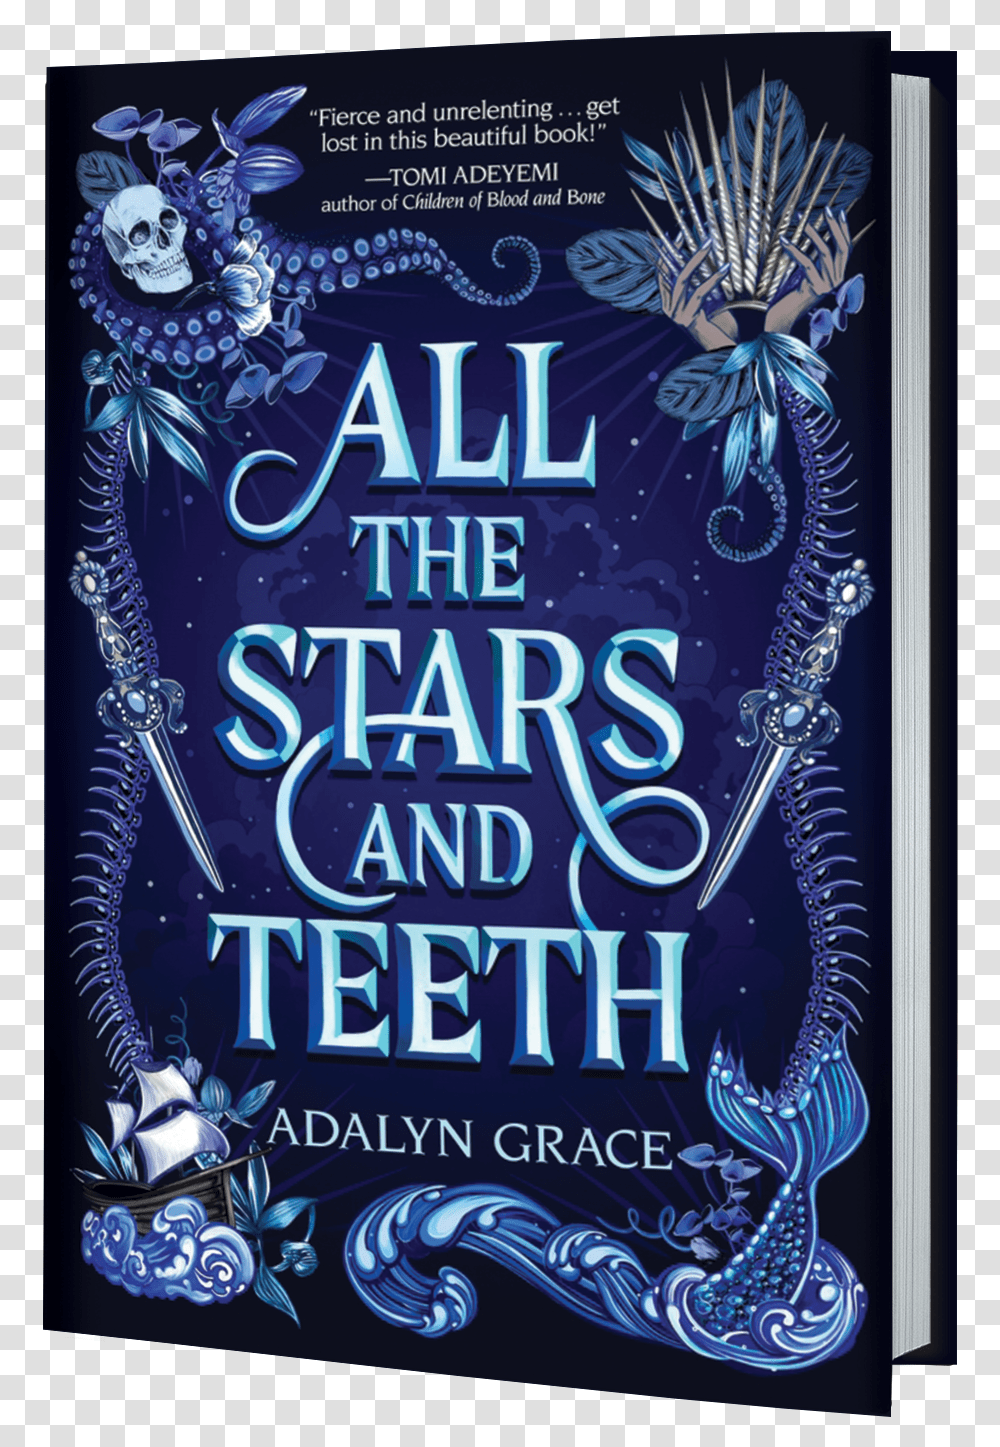 Adalyn Grace All The Stars And Teeth All The Stars And Teeth Adalyn Grace, Poster, Advertisement, Flyer, Paper Transparent Png